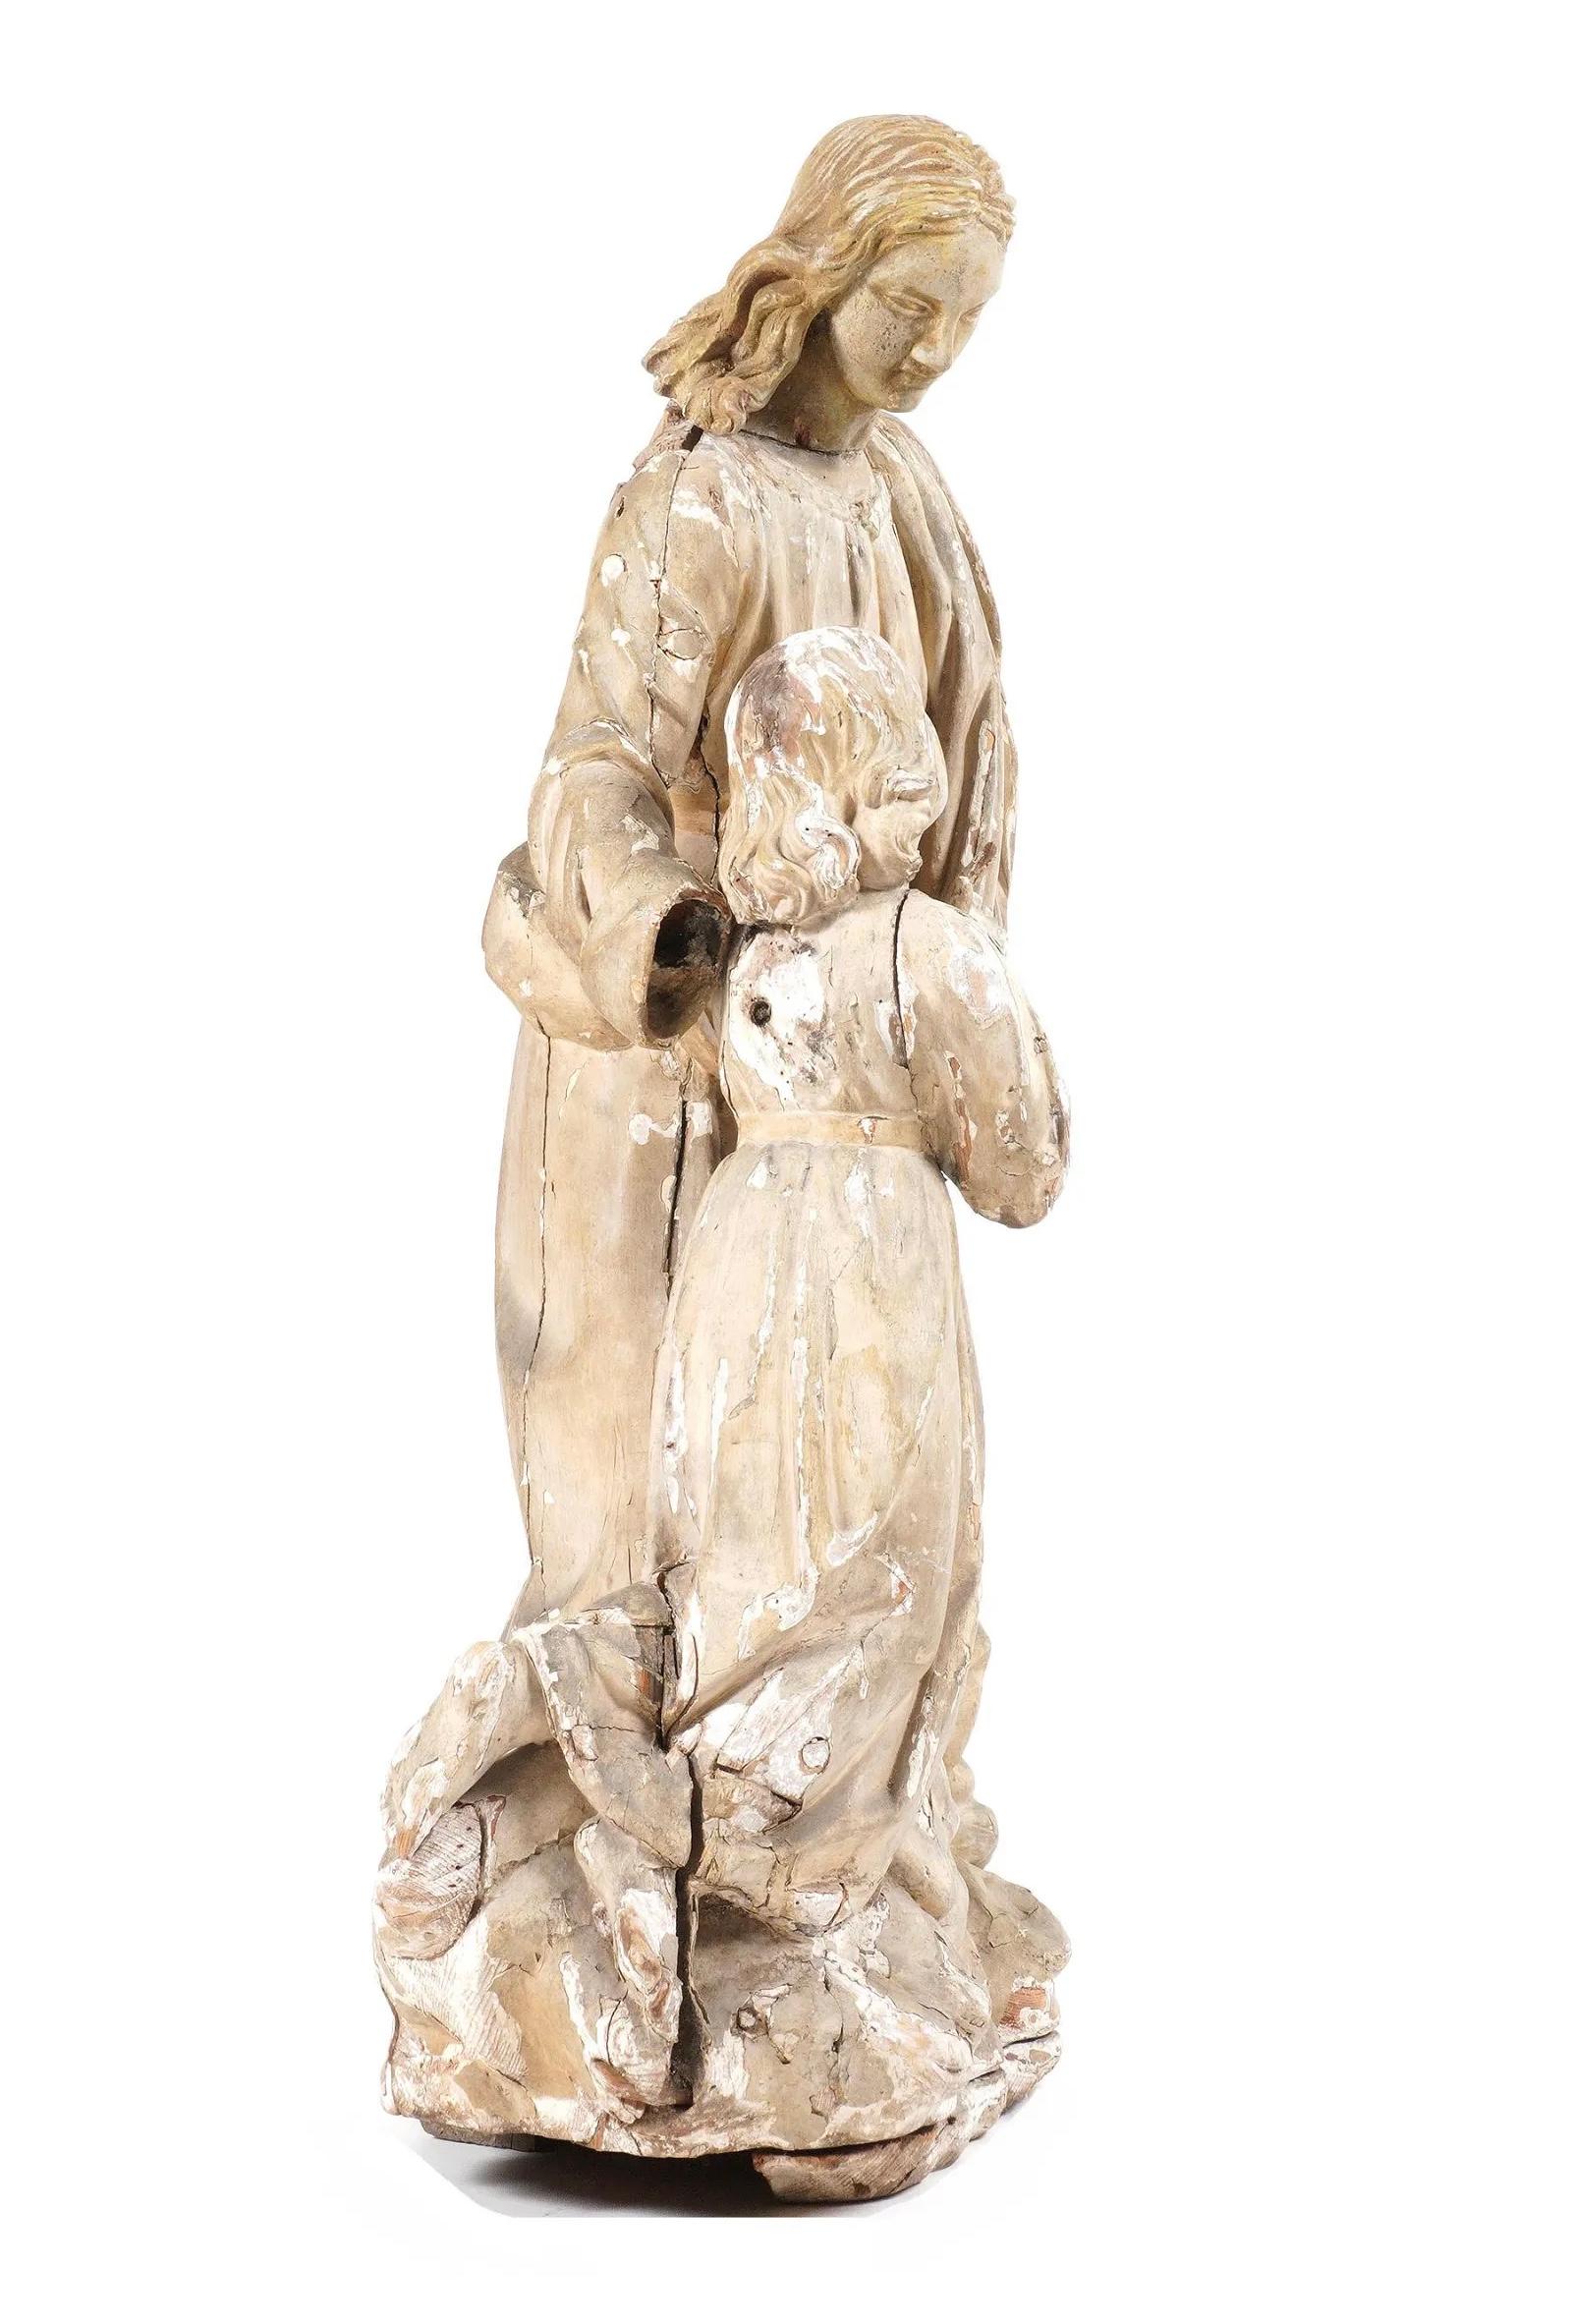 18th Century and Earlier 18th Century, French Carved Wood Sculpture